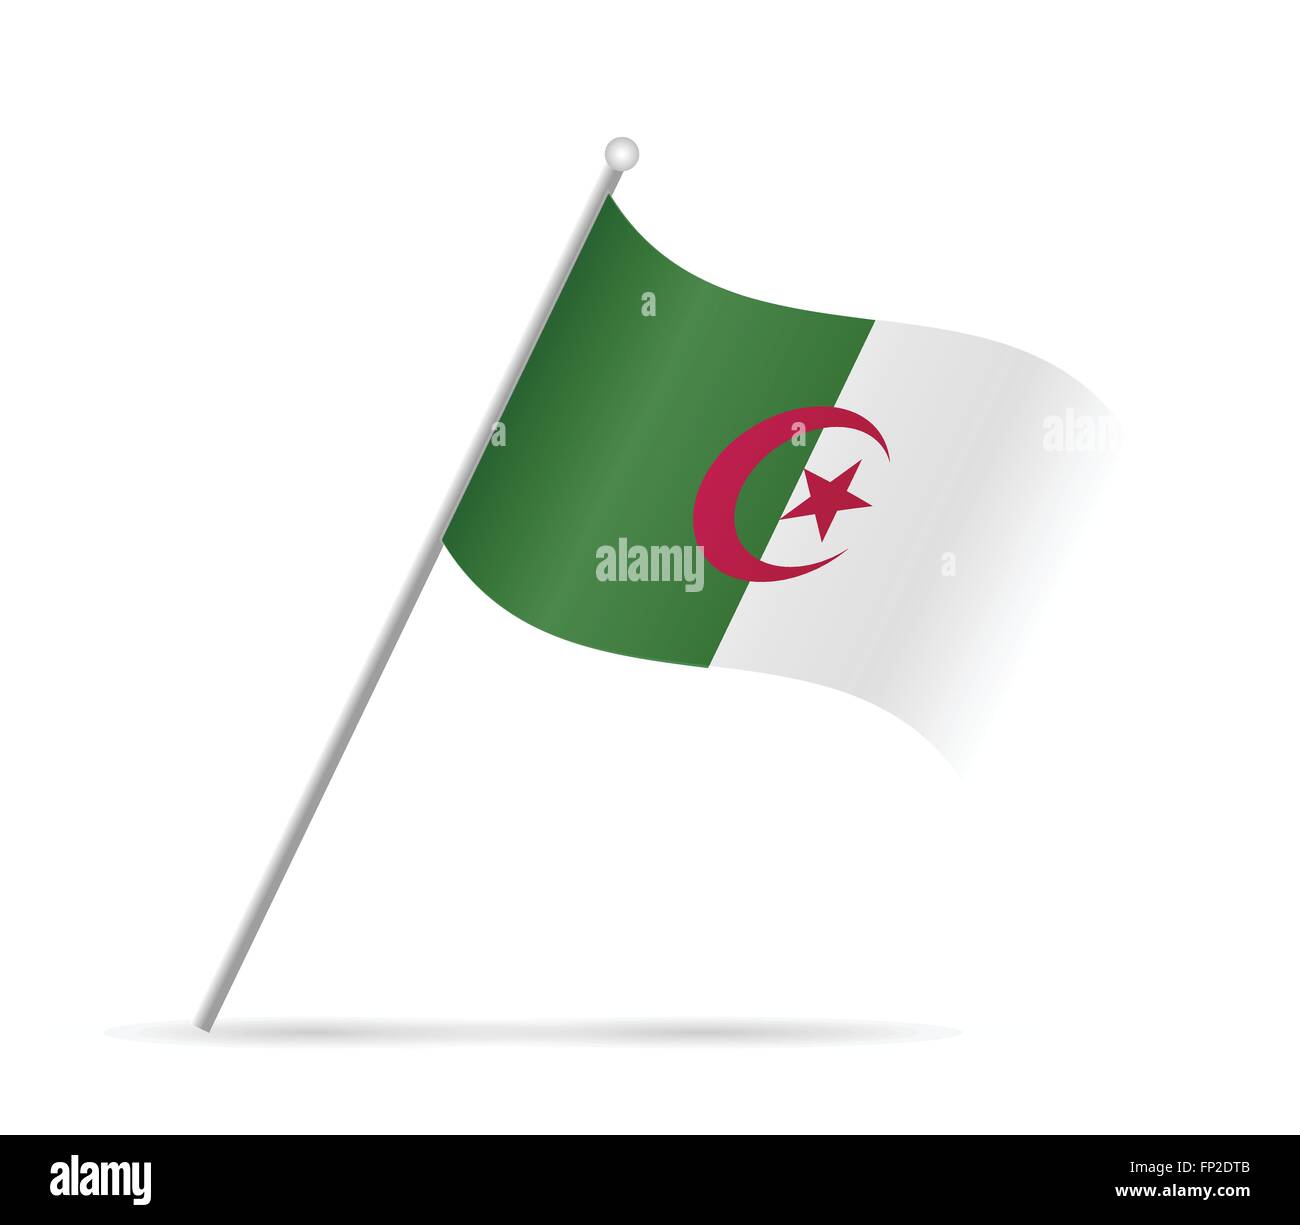 Illustration of a flag from Algeria isolated on a white background. Stock Vector